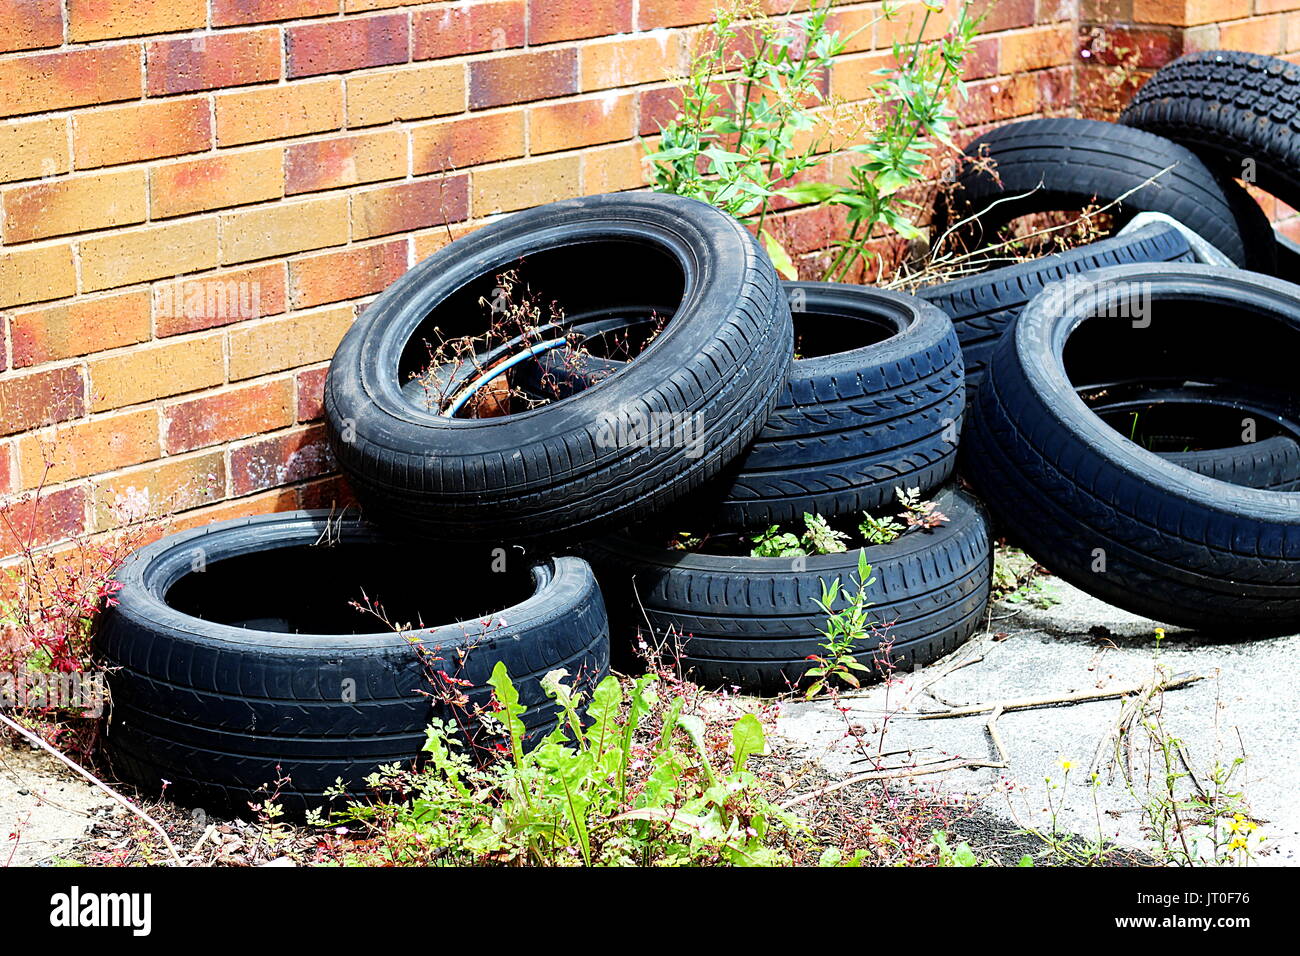 Weeds starting to grow amongst a pile of tyres left behind an autocentre Stock Photo